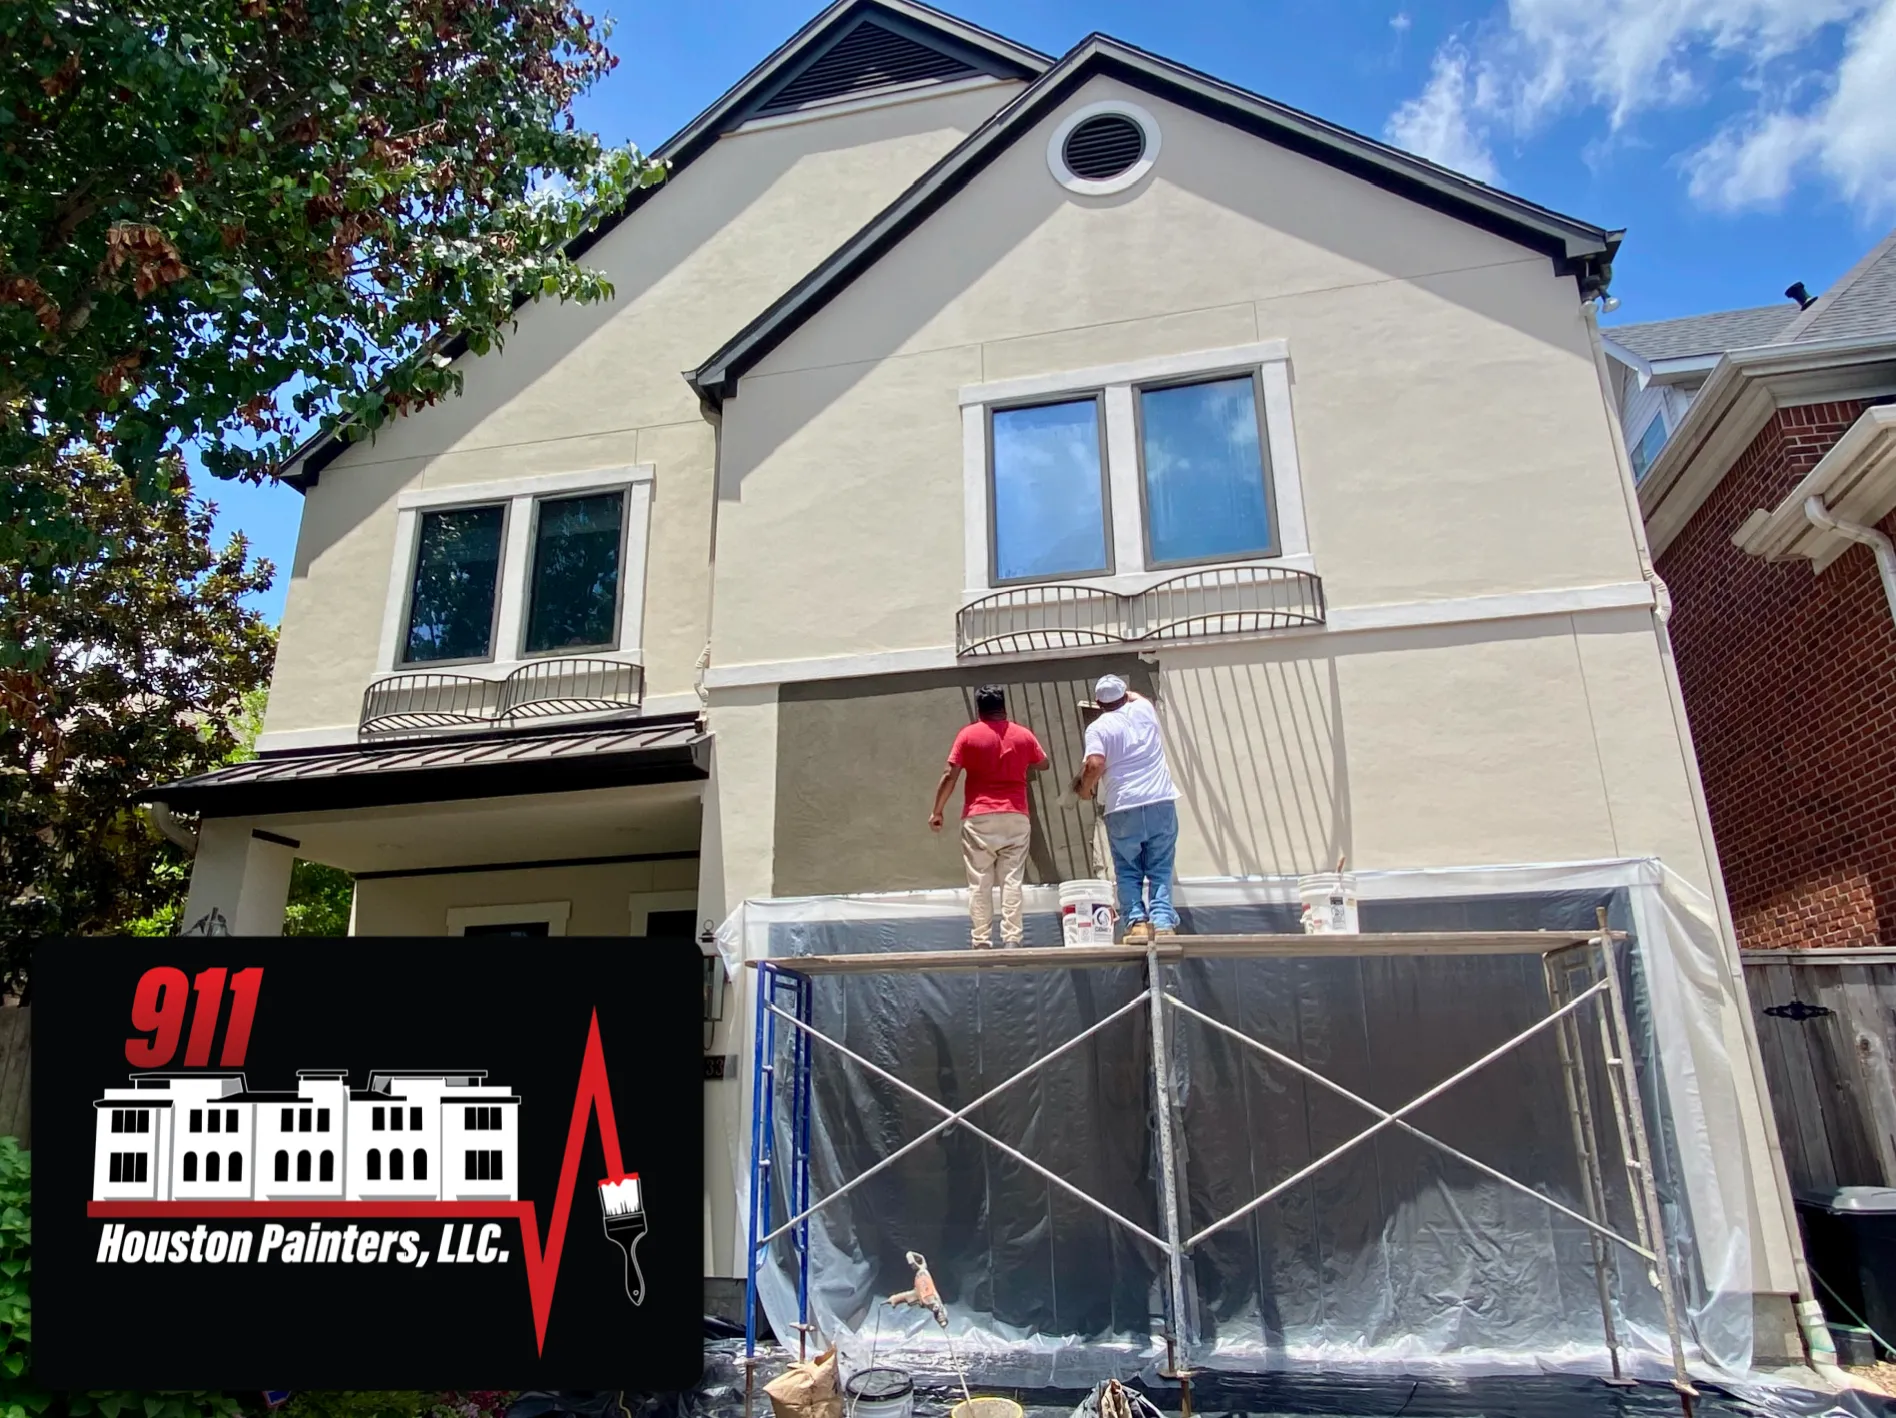 Our stucco repair service is designed to fix any damage to your home's stucco. We'll patch up any cracks or holes, and make your home look good as new. for 911 Houston Painters, LLC in Houston, TX